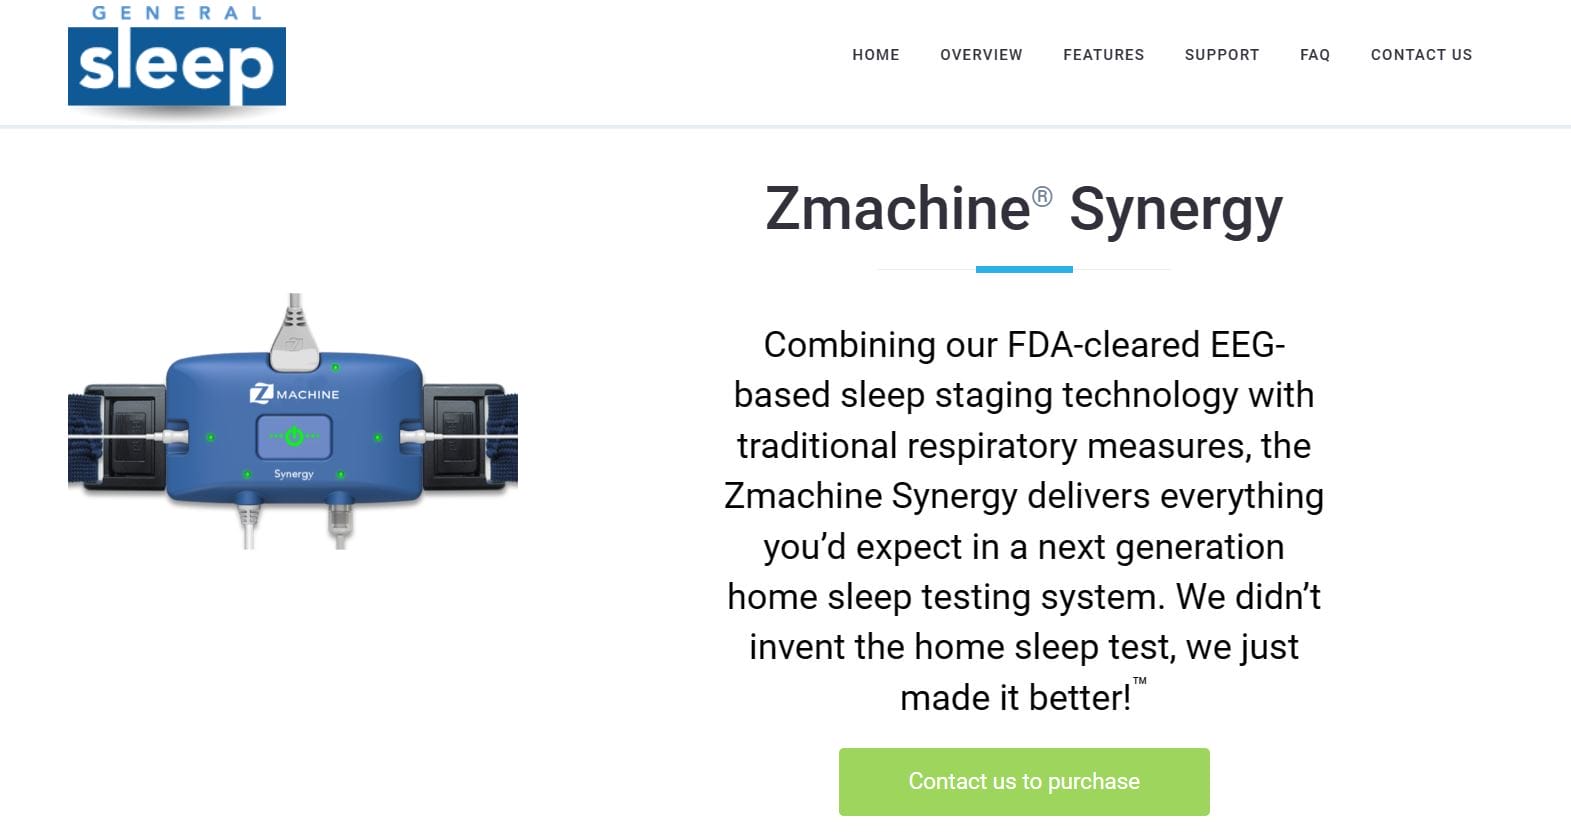 Website homepage for general sleep, featuring the Zmachine Synergy, an FDA-cleared EEG-based sleep technology device, with navigation tabs and a contact button.